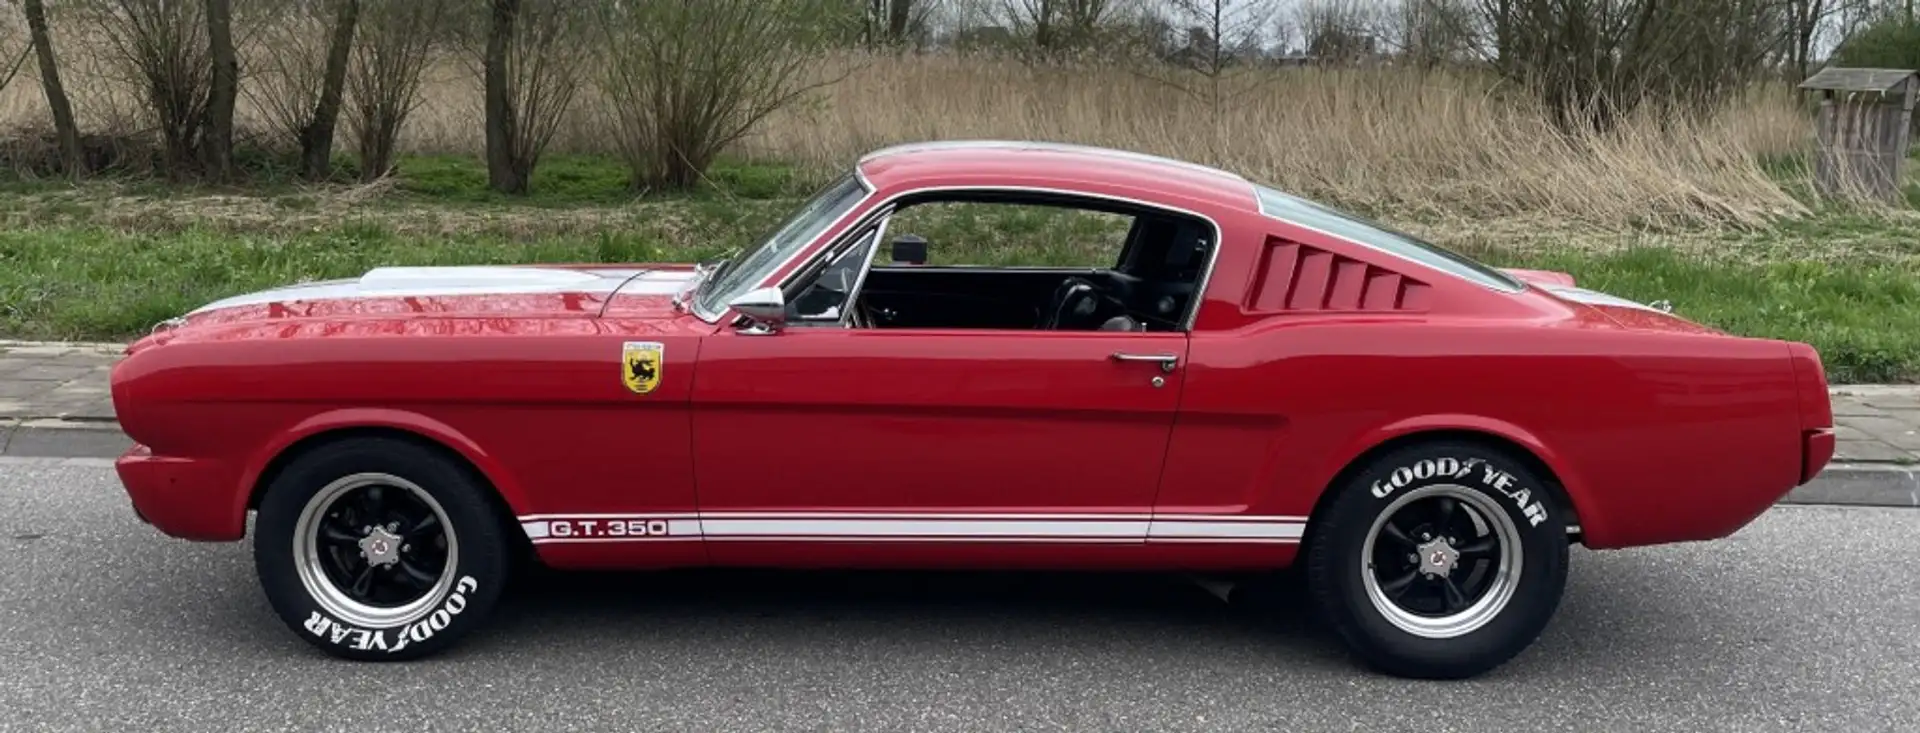 Ford Mustang Fastback GT350 Tribute Rosso - 2